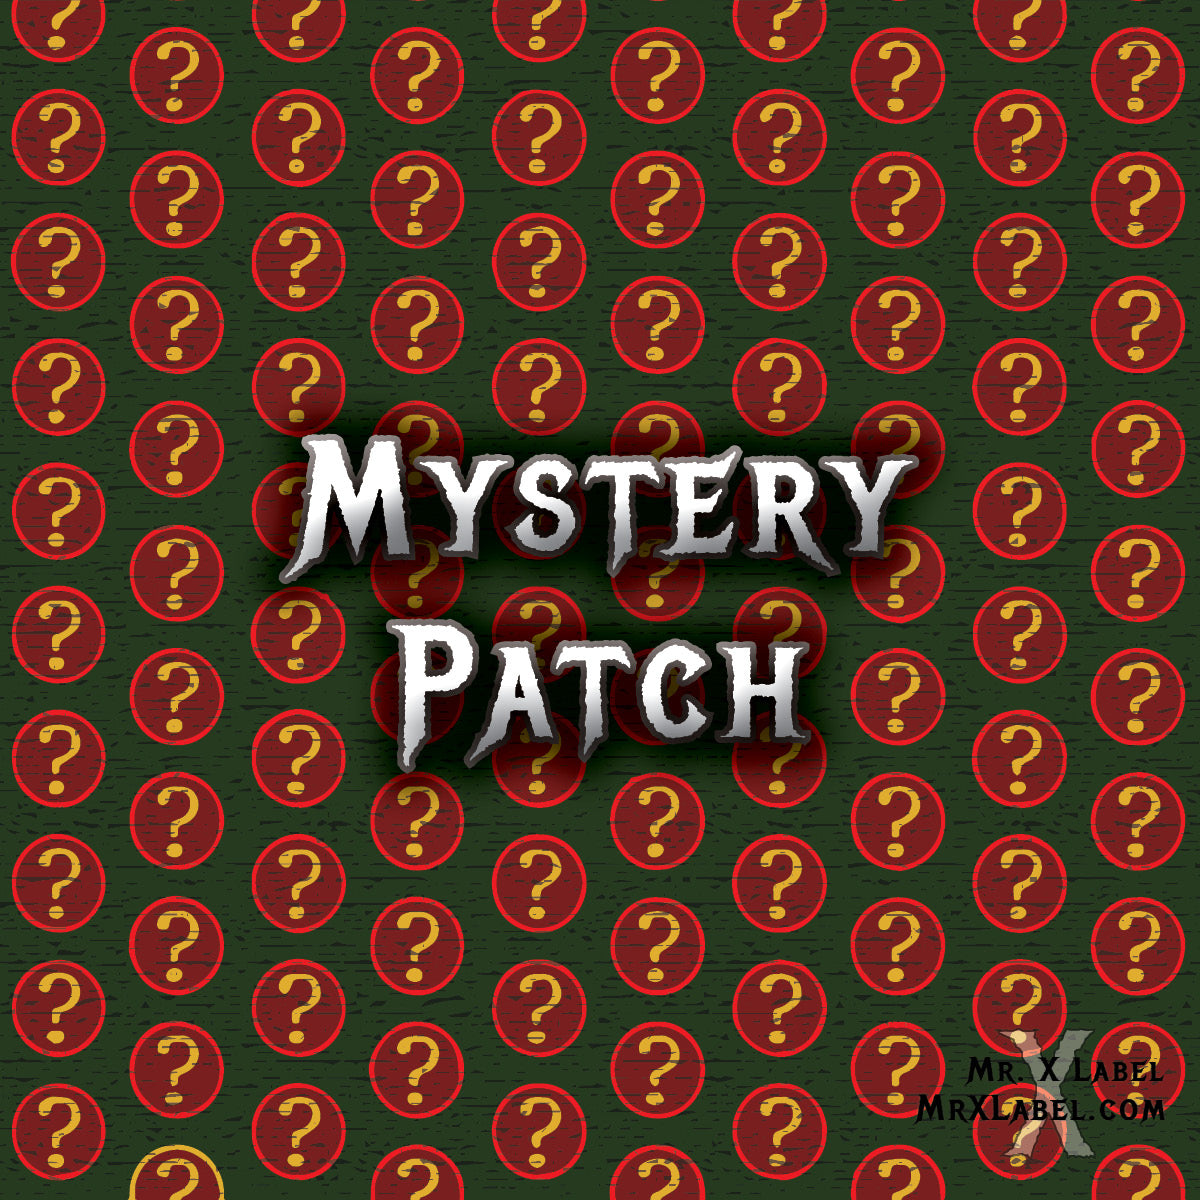 Mystery 6 - Santa Hand with Reflecting Ornament Patch